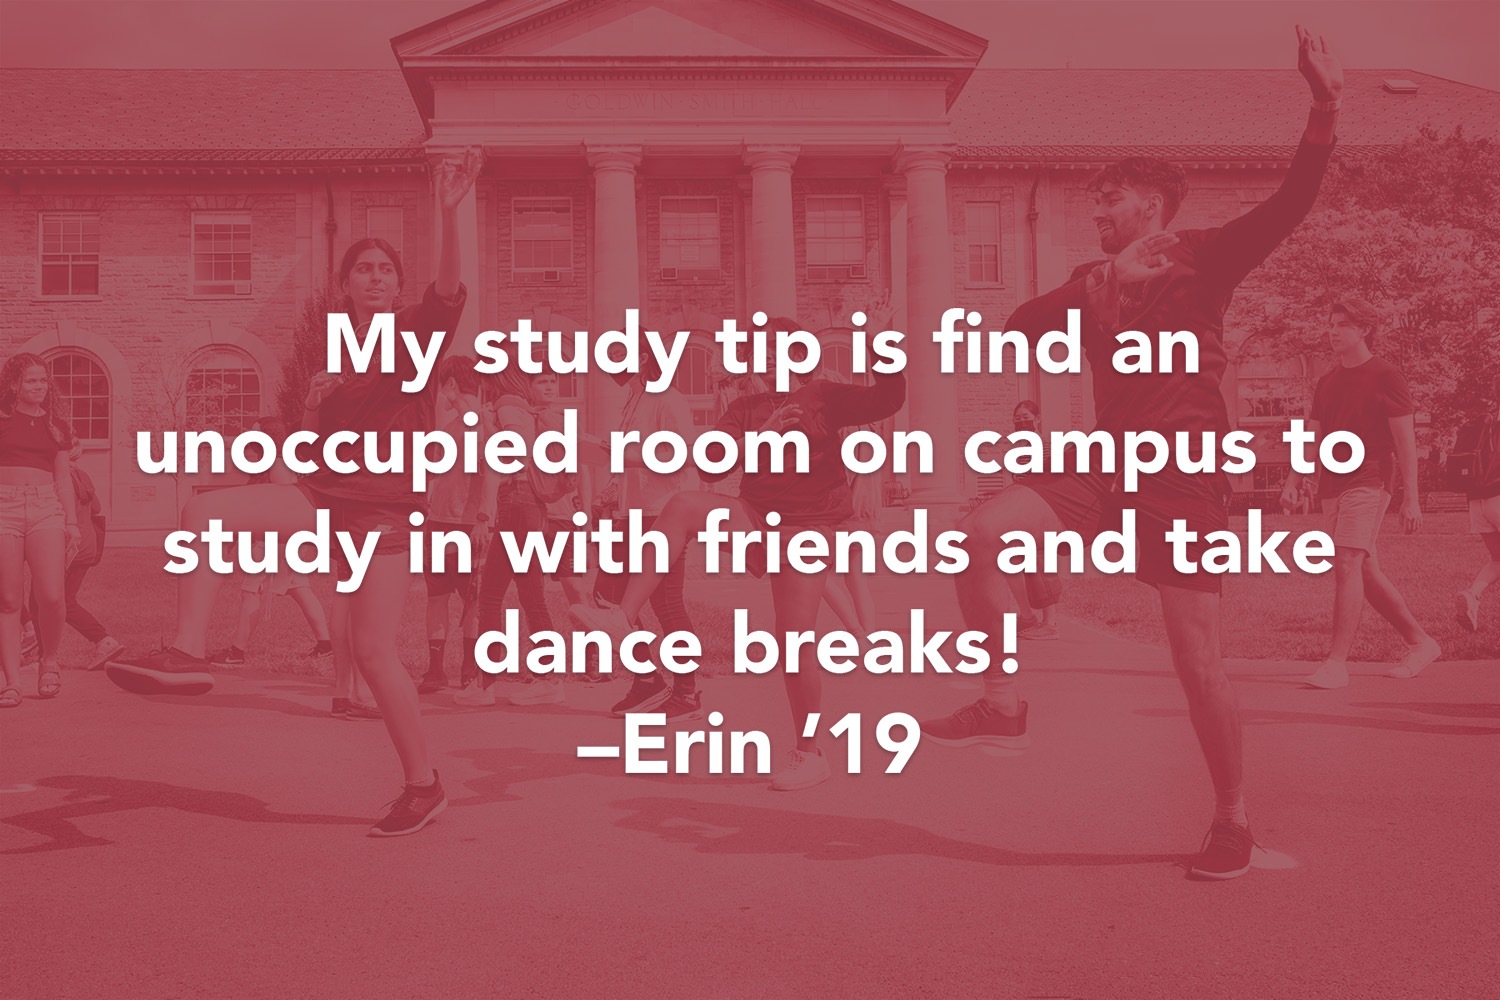 Quote: My study tip is find an unoccupied room on campus to study in with friends and take dance breaks! - Erin ' 19